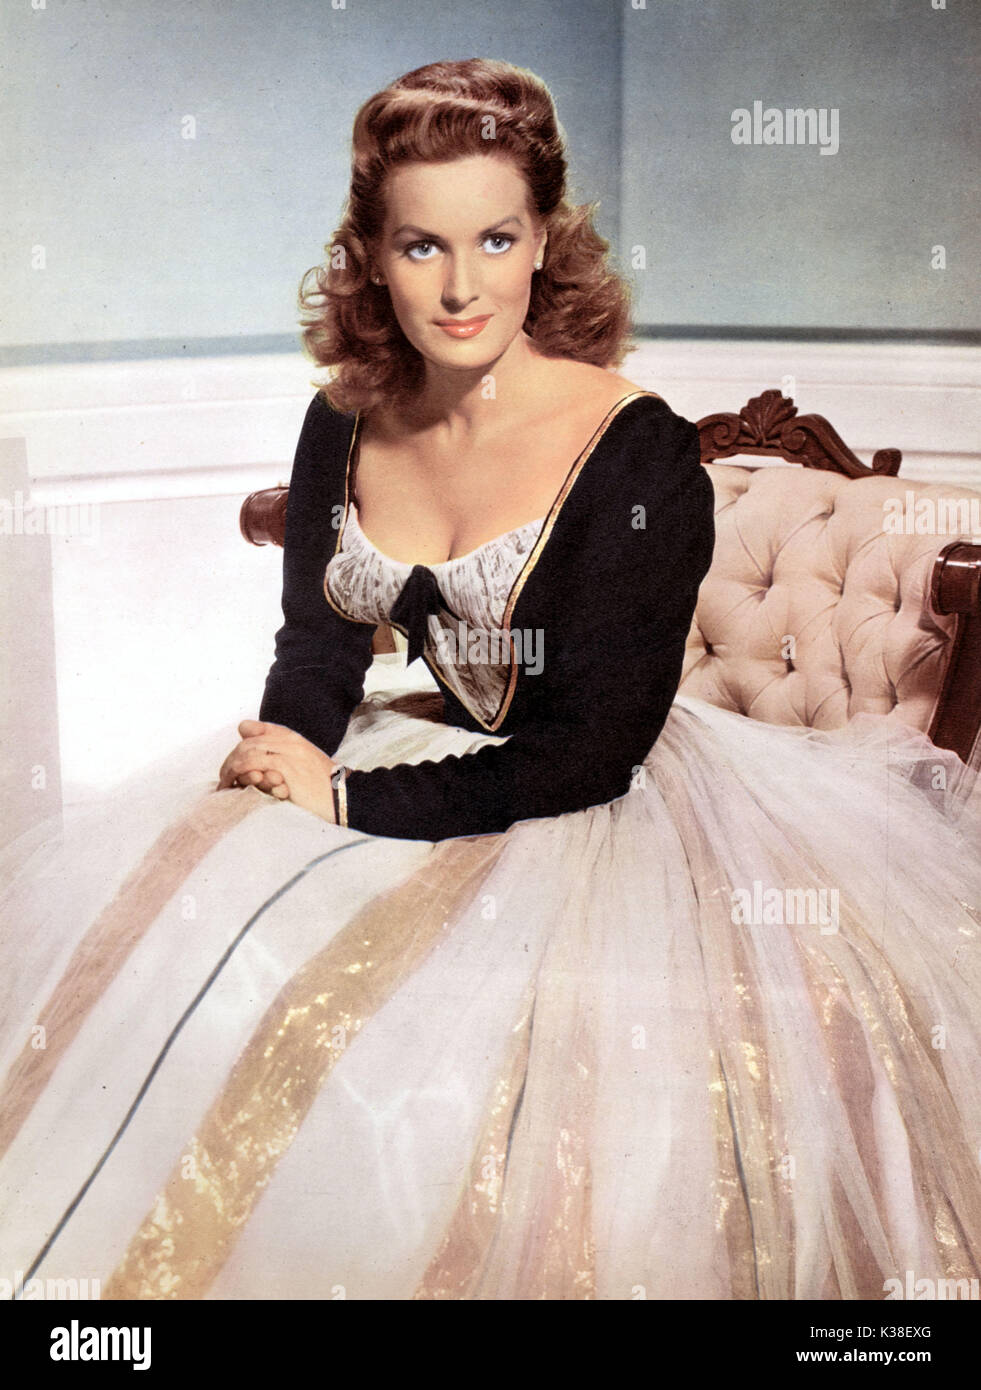 ACTRESS MAUREEN O'HARA HA/20 COLOUR PICTURE FROM THE RONALD GRANT ARCHIVE ACTRESS MAUREEN O'HARA HA/20 COLOUR Stock Photo